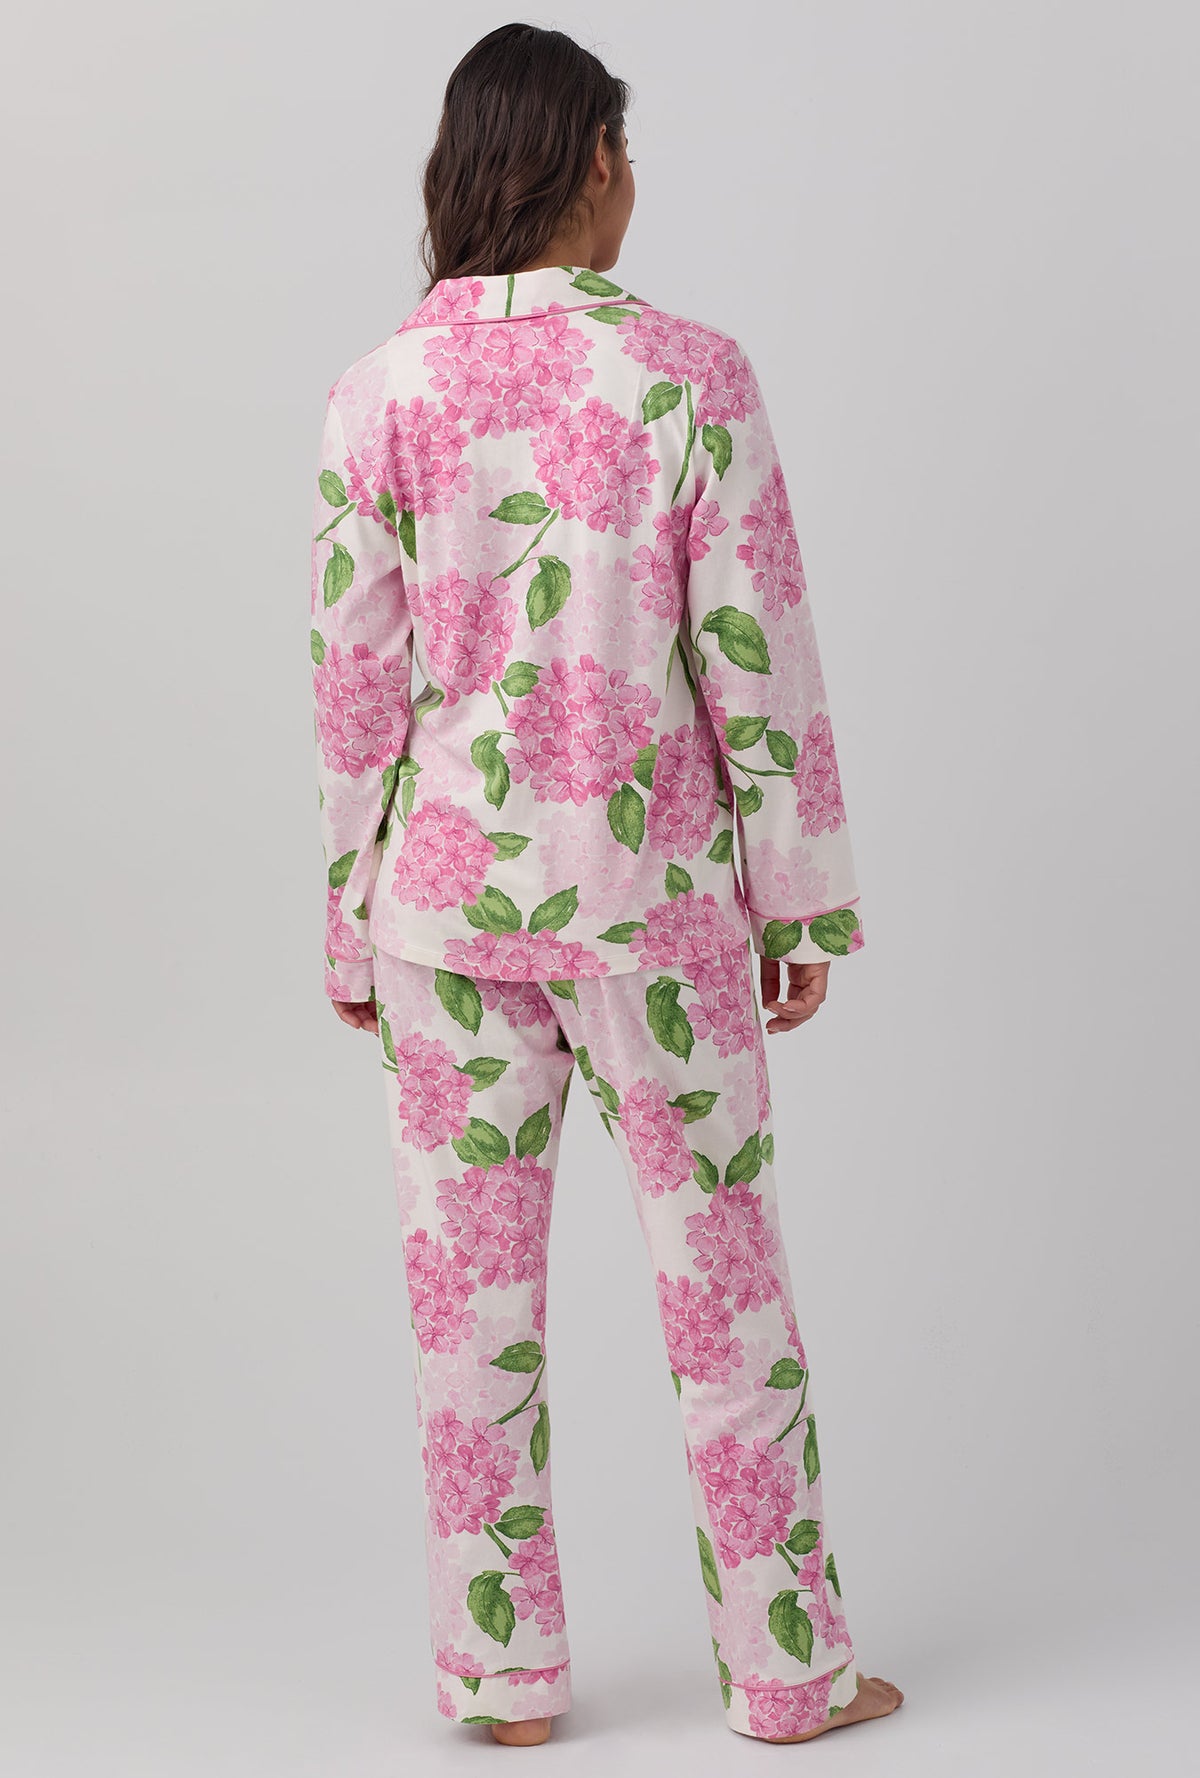 A lady wearing pink Long Sleeve Classic Stretch Jersey PJ Set with Grand Hydrangea print